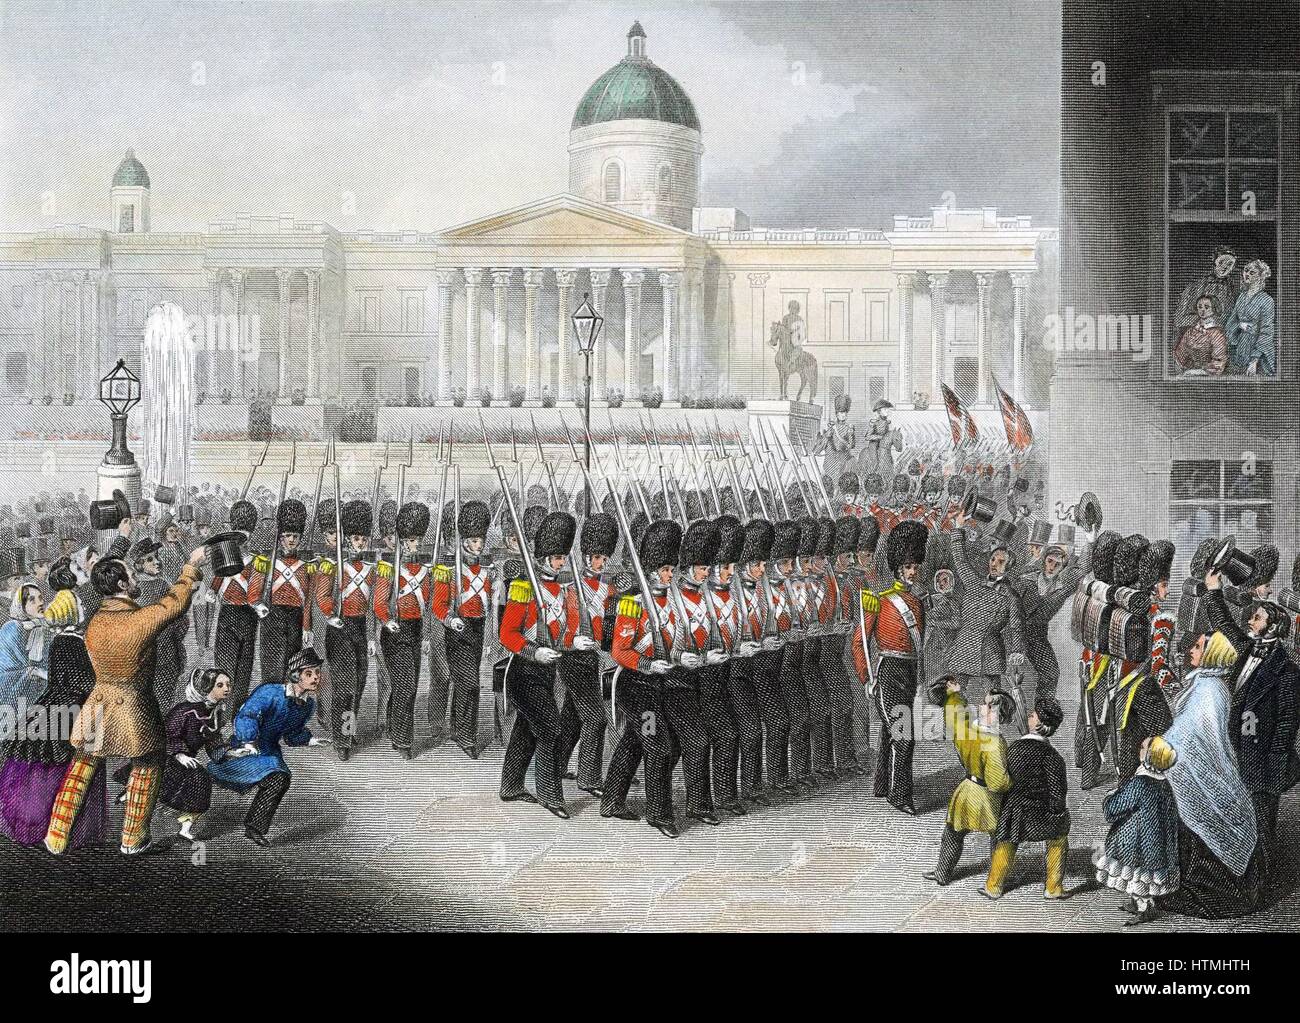 Crimean War (Russo-Turkish War) 1853-56: British Grenadier Guards departing from Trafalgar Square, London, 22 February 1854 on route for the Crimea. Hand-coloured engraving c1860 Stock Photo